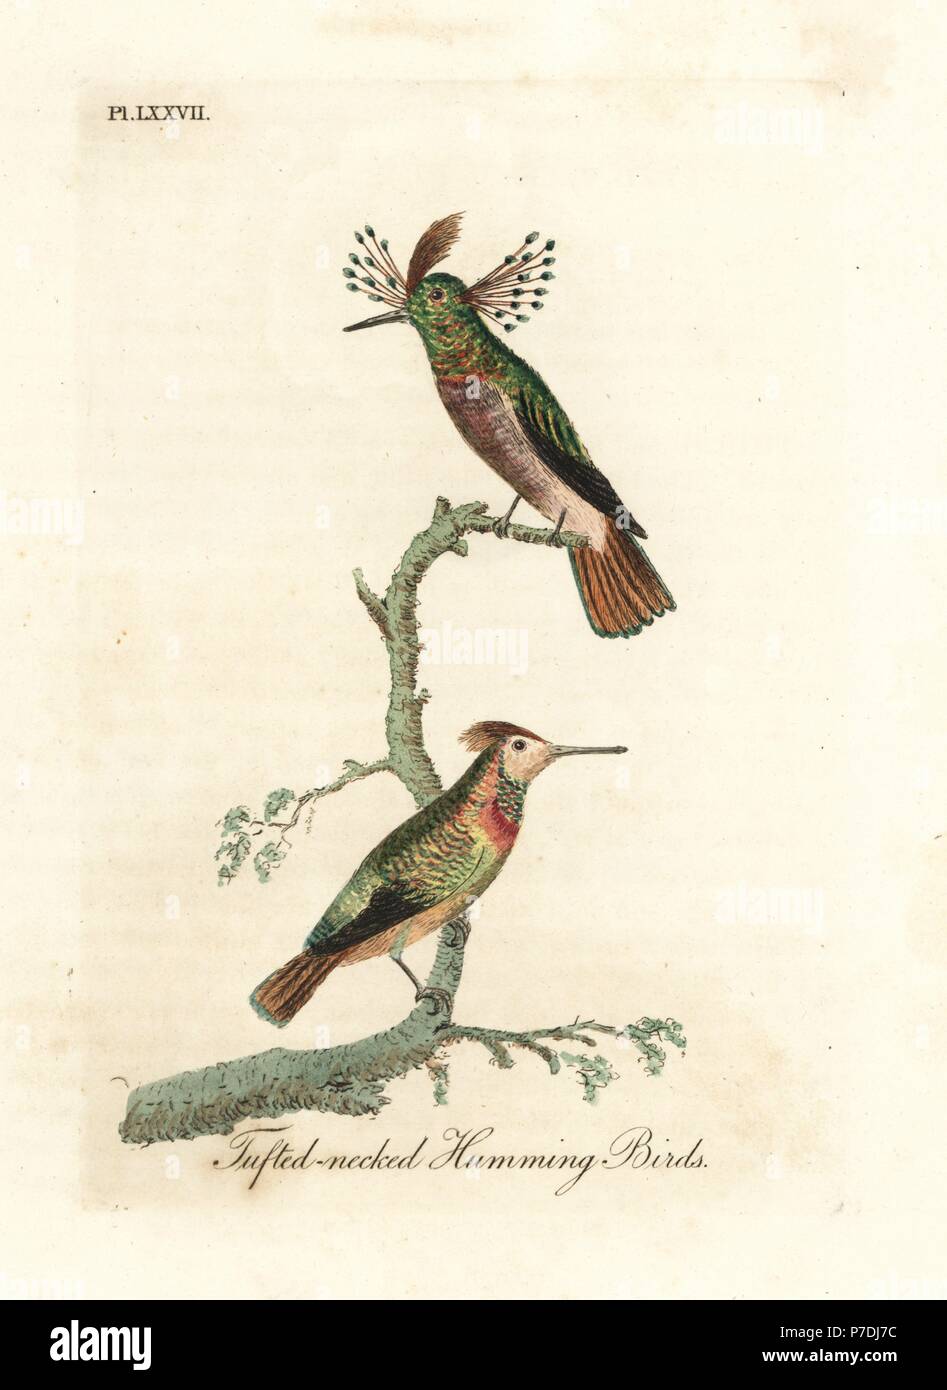 Tufted coquettes, Lophornis ornatus (Tufted-necked hummingbirds, Trochilus ornatus). Male and female. Handcoloured copperplate drawn and engraved by John Latham from his own A General History of Birds, Winchester, 1822. Stock Photo